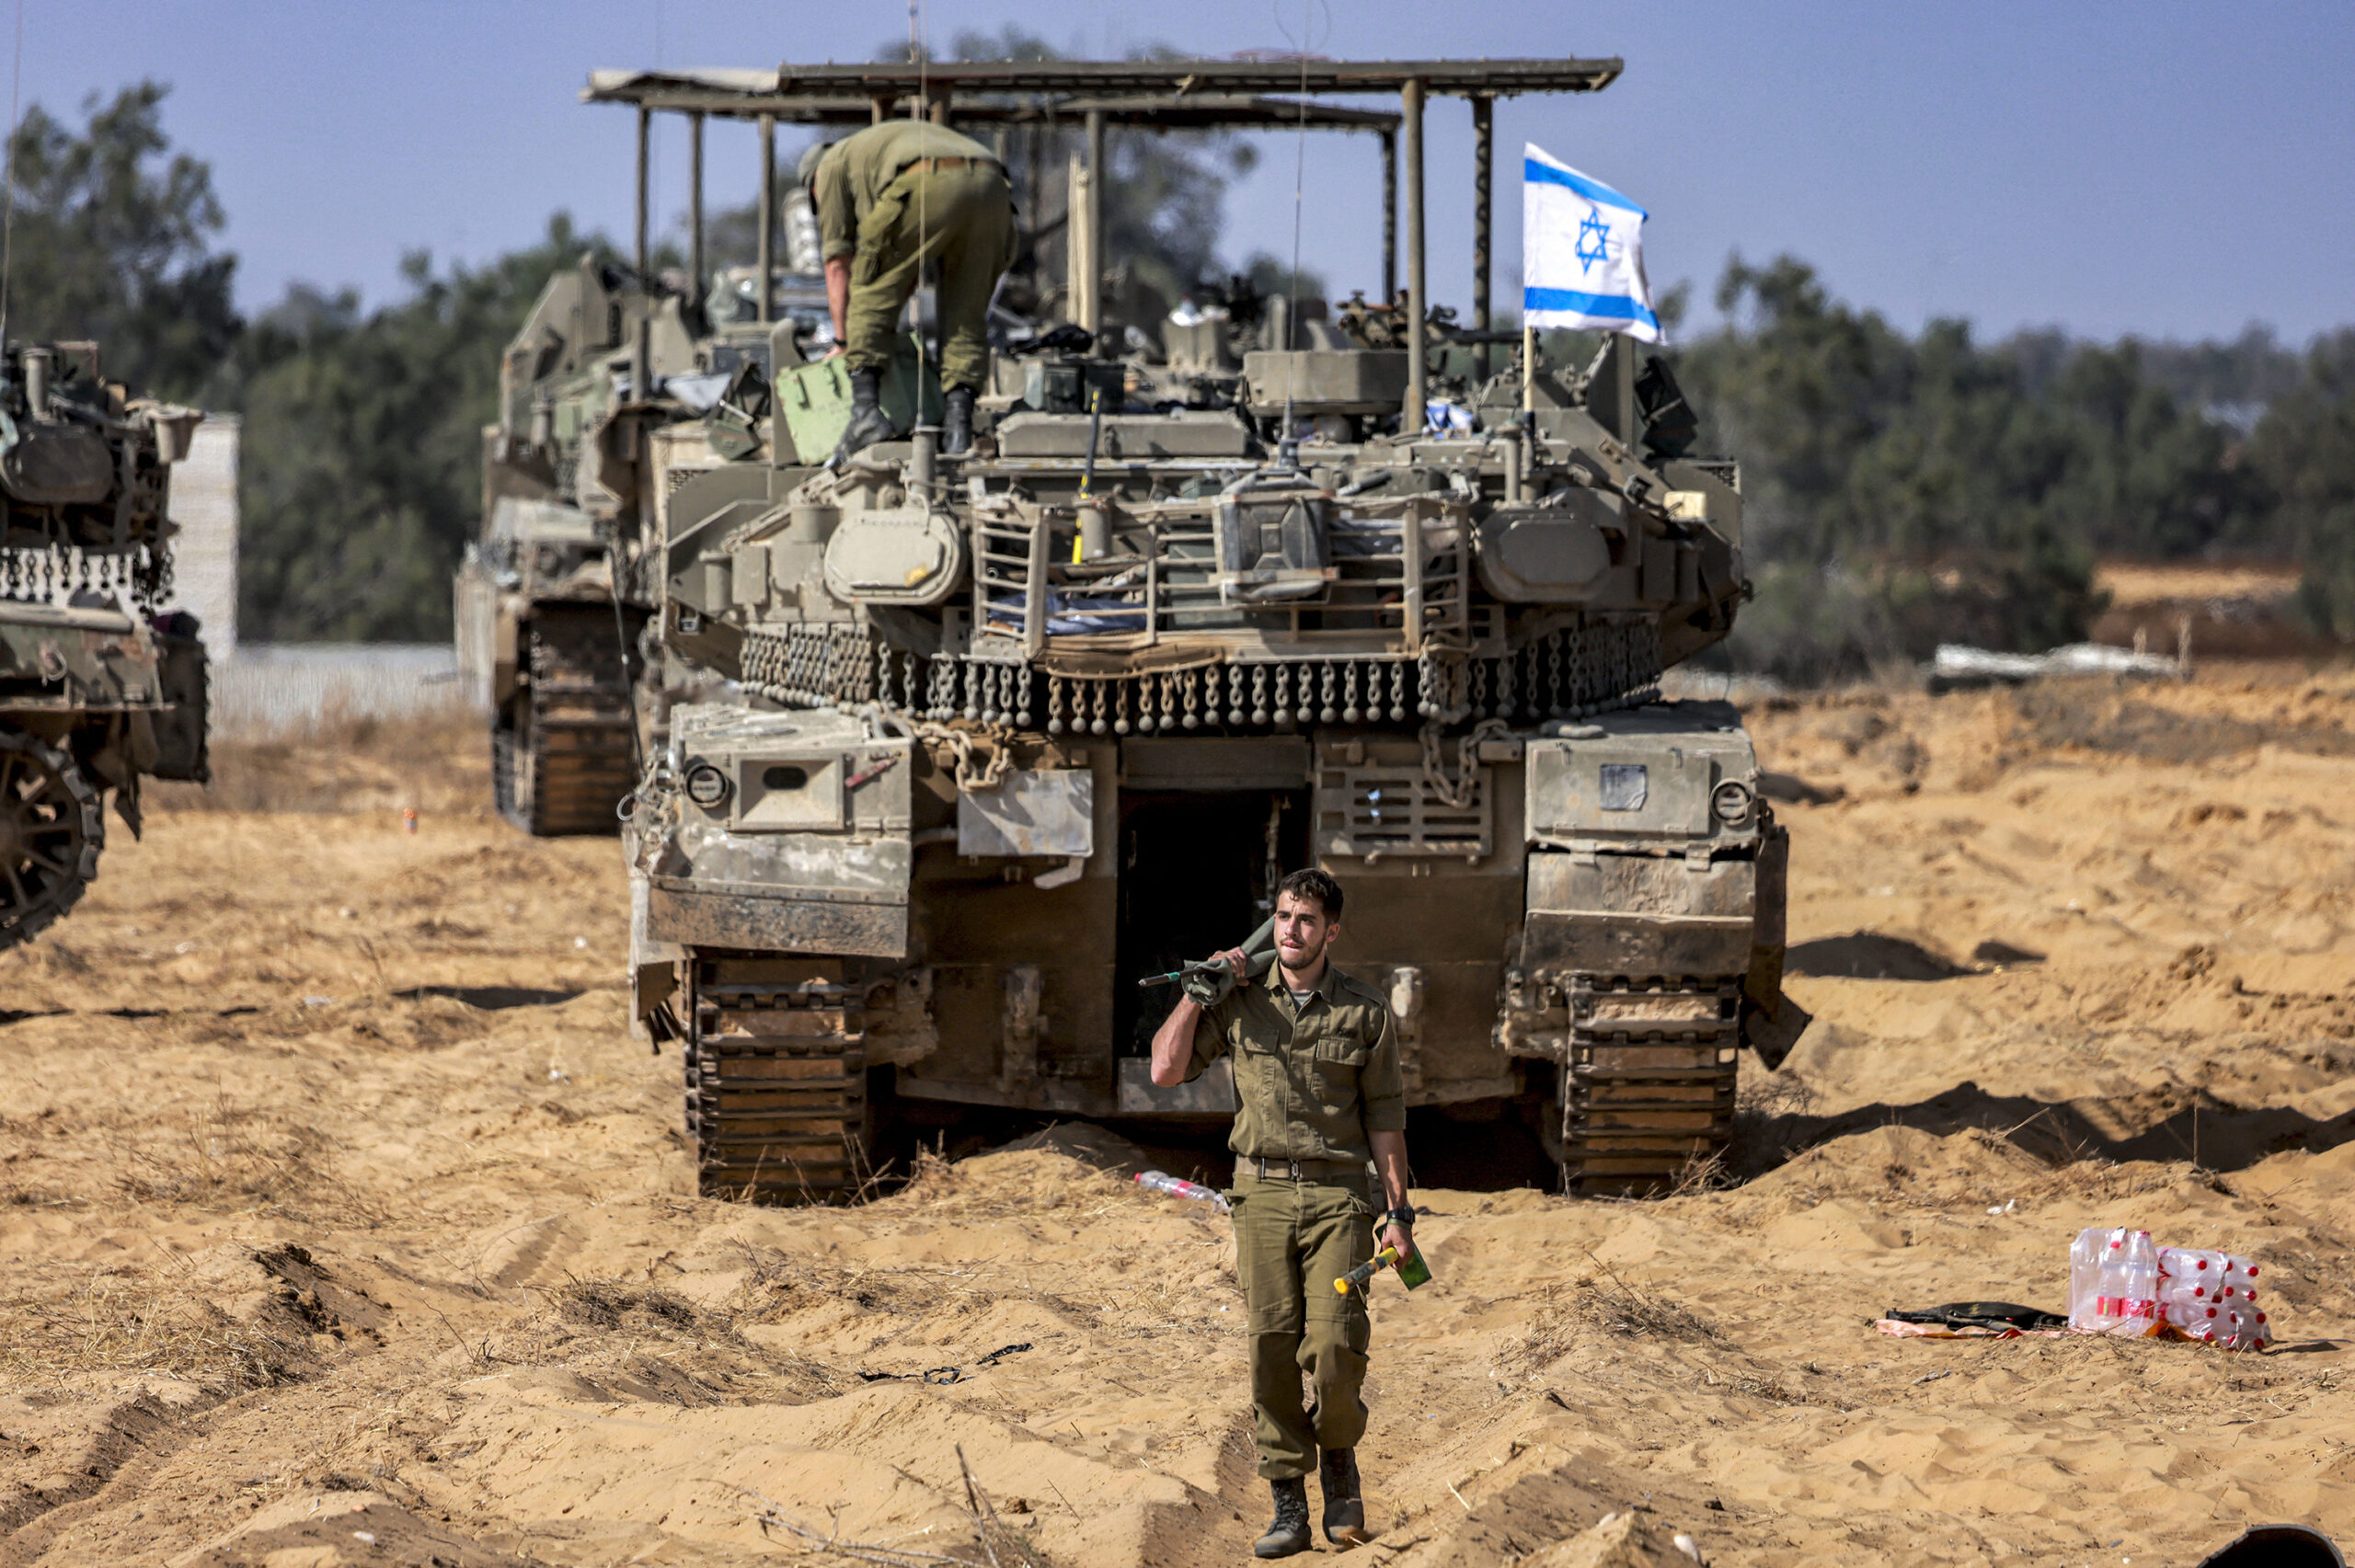 How Israel’s military investigates itself in cases of possible wrongdoing